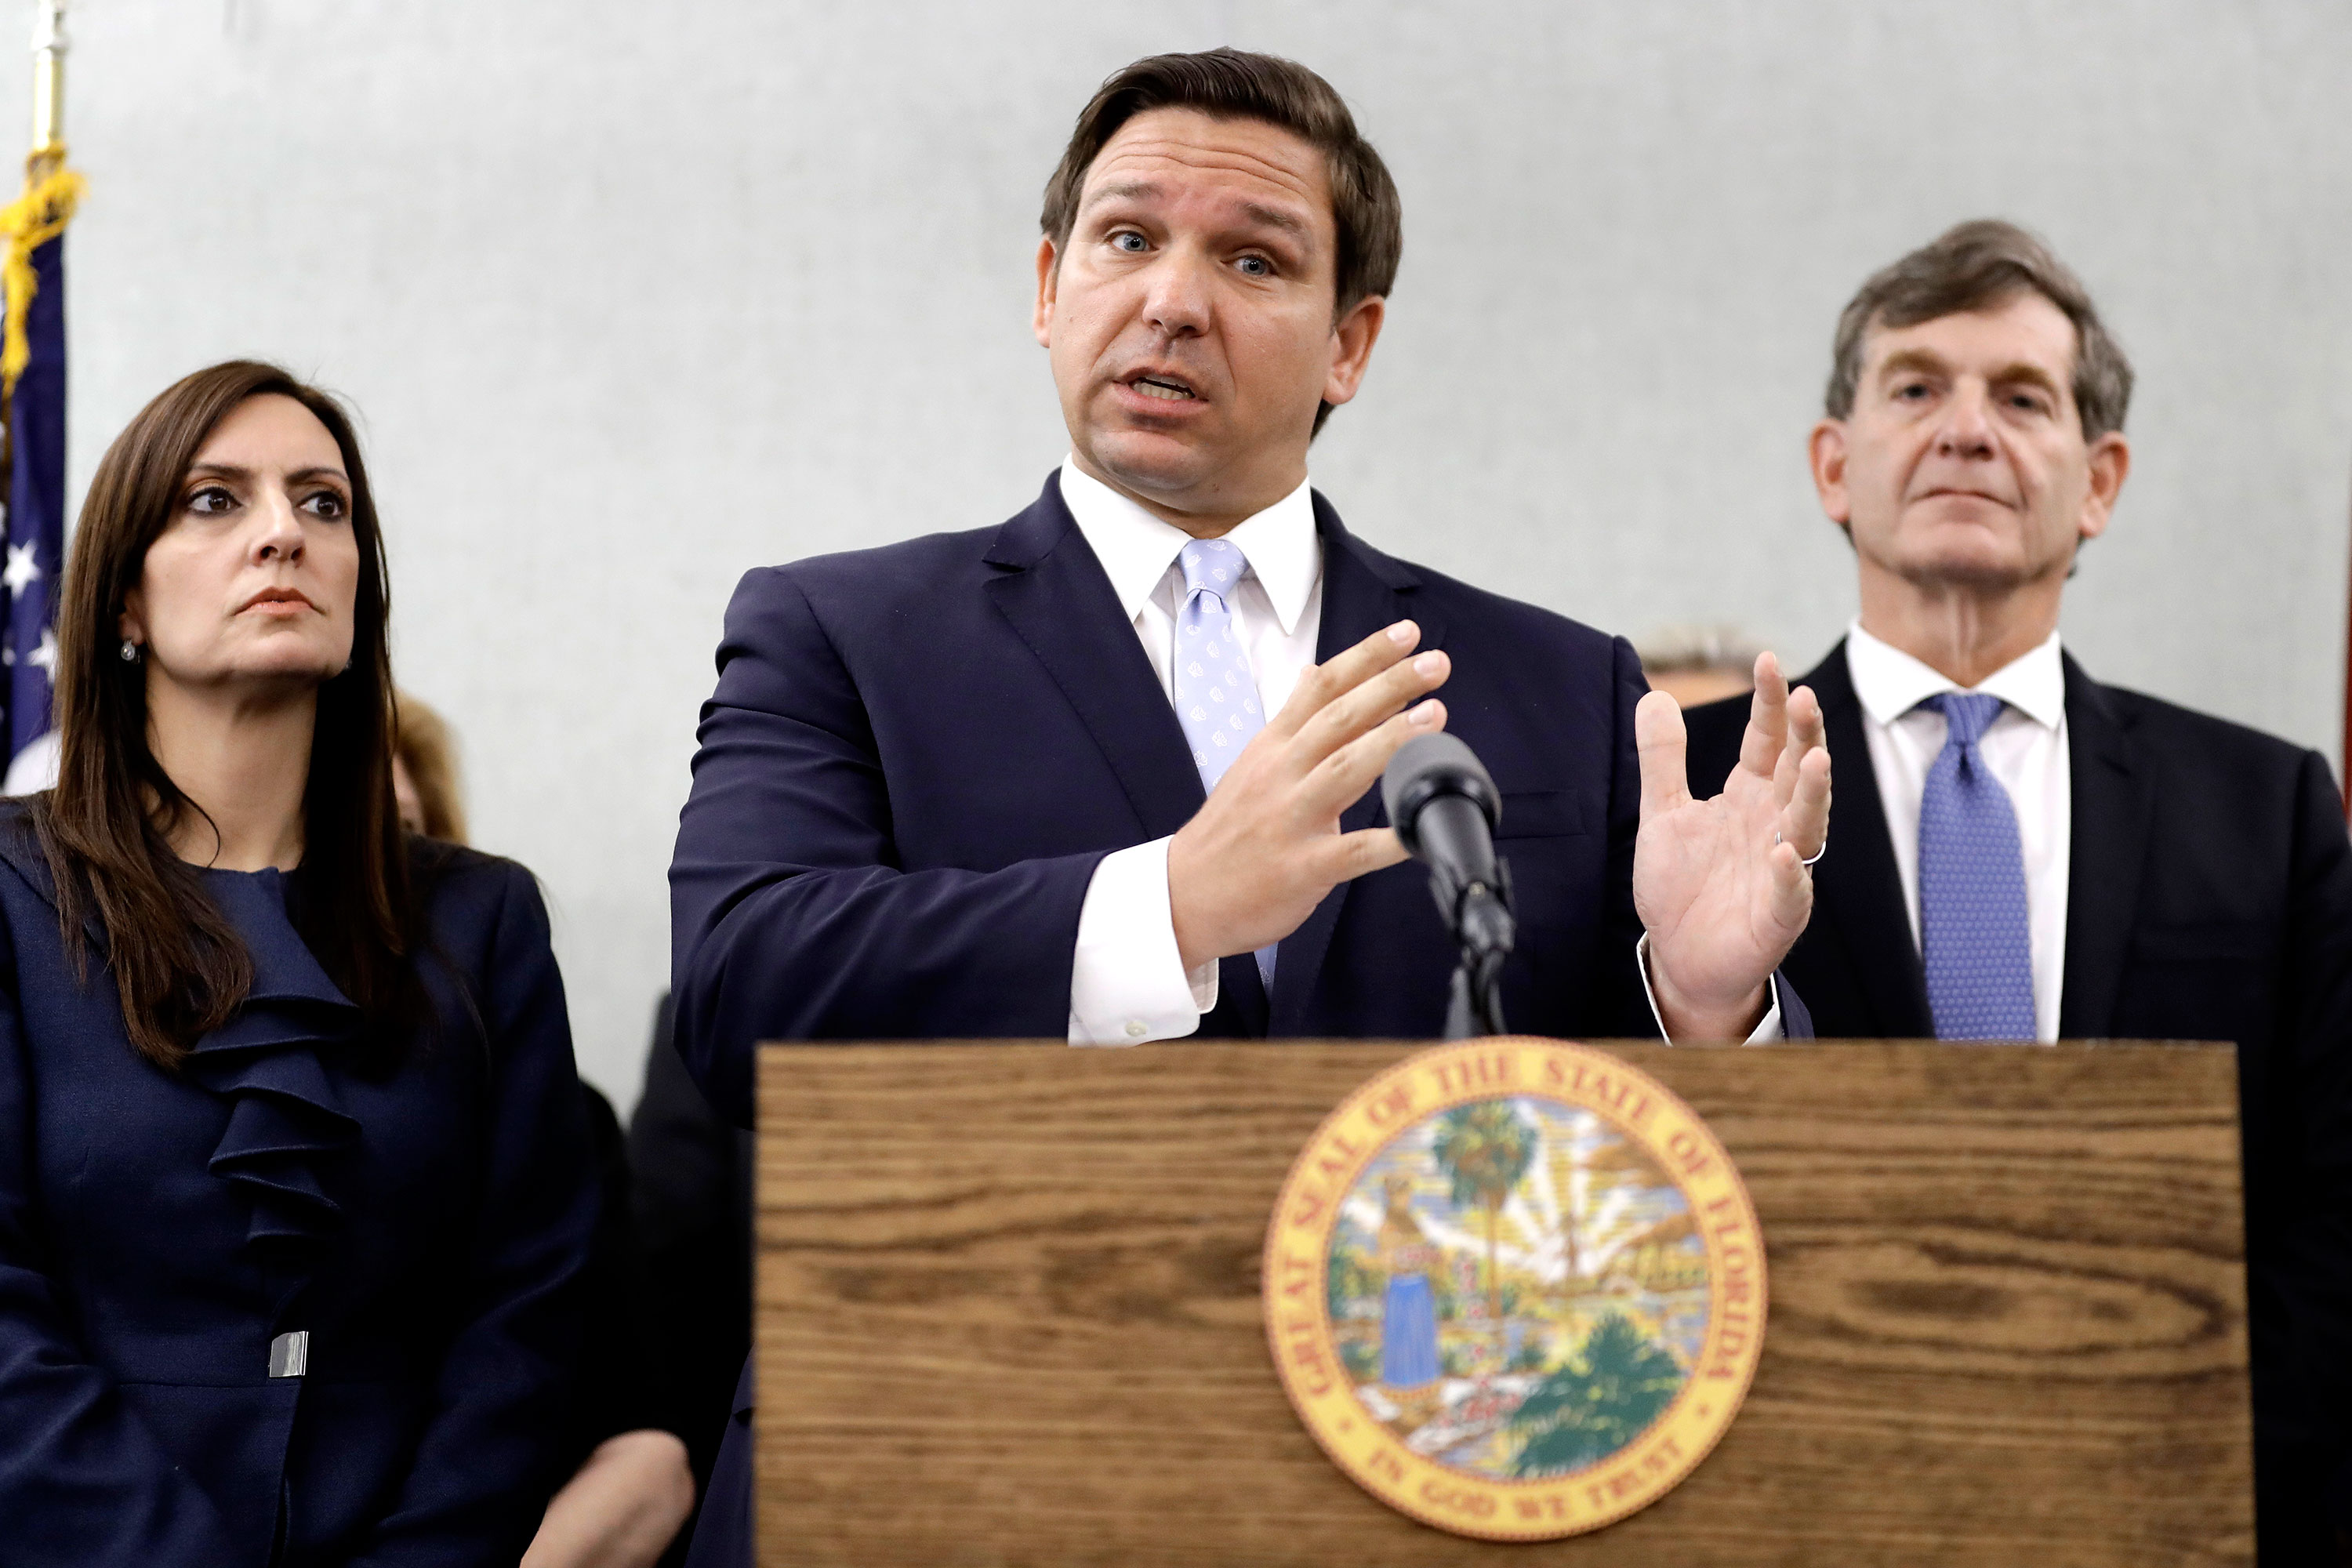 Florida Governor Ron DeSantis, center, speaks about coronavirus cases at a news conference in Tampa, Florida on March 2. 